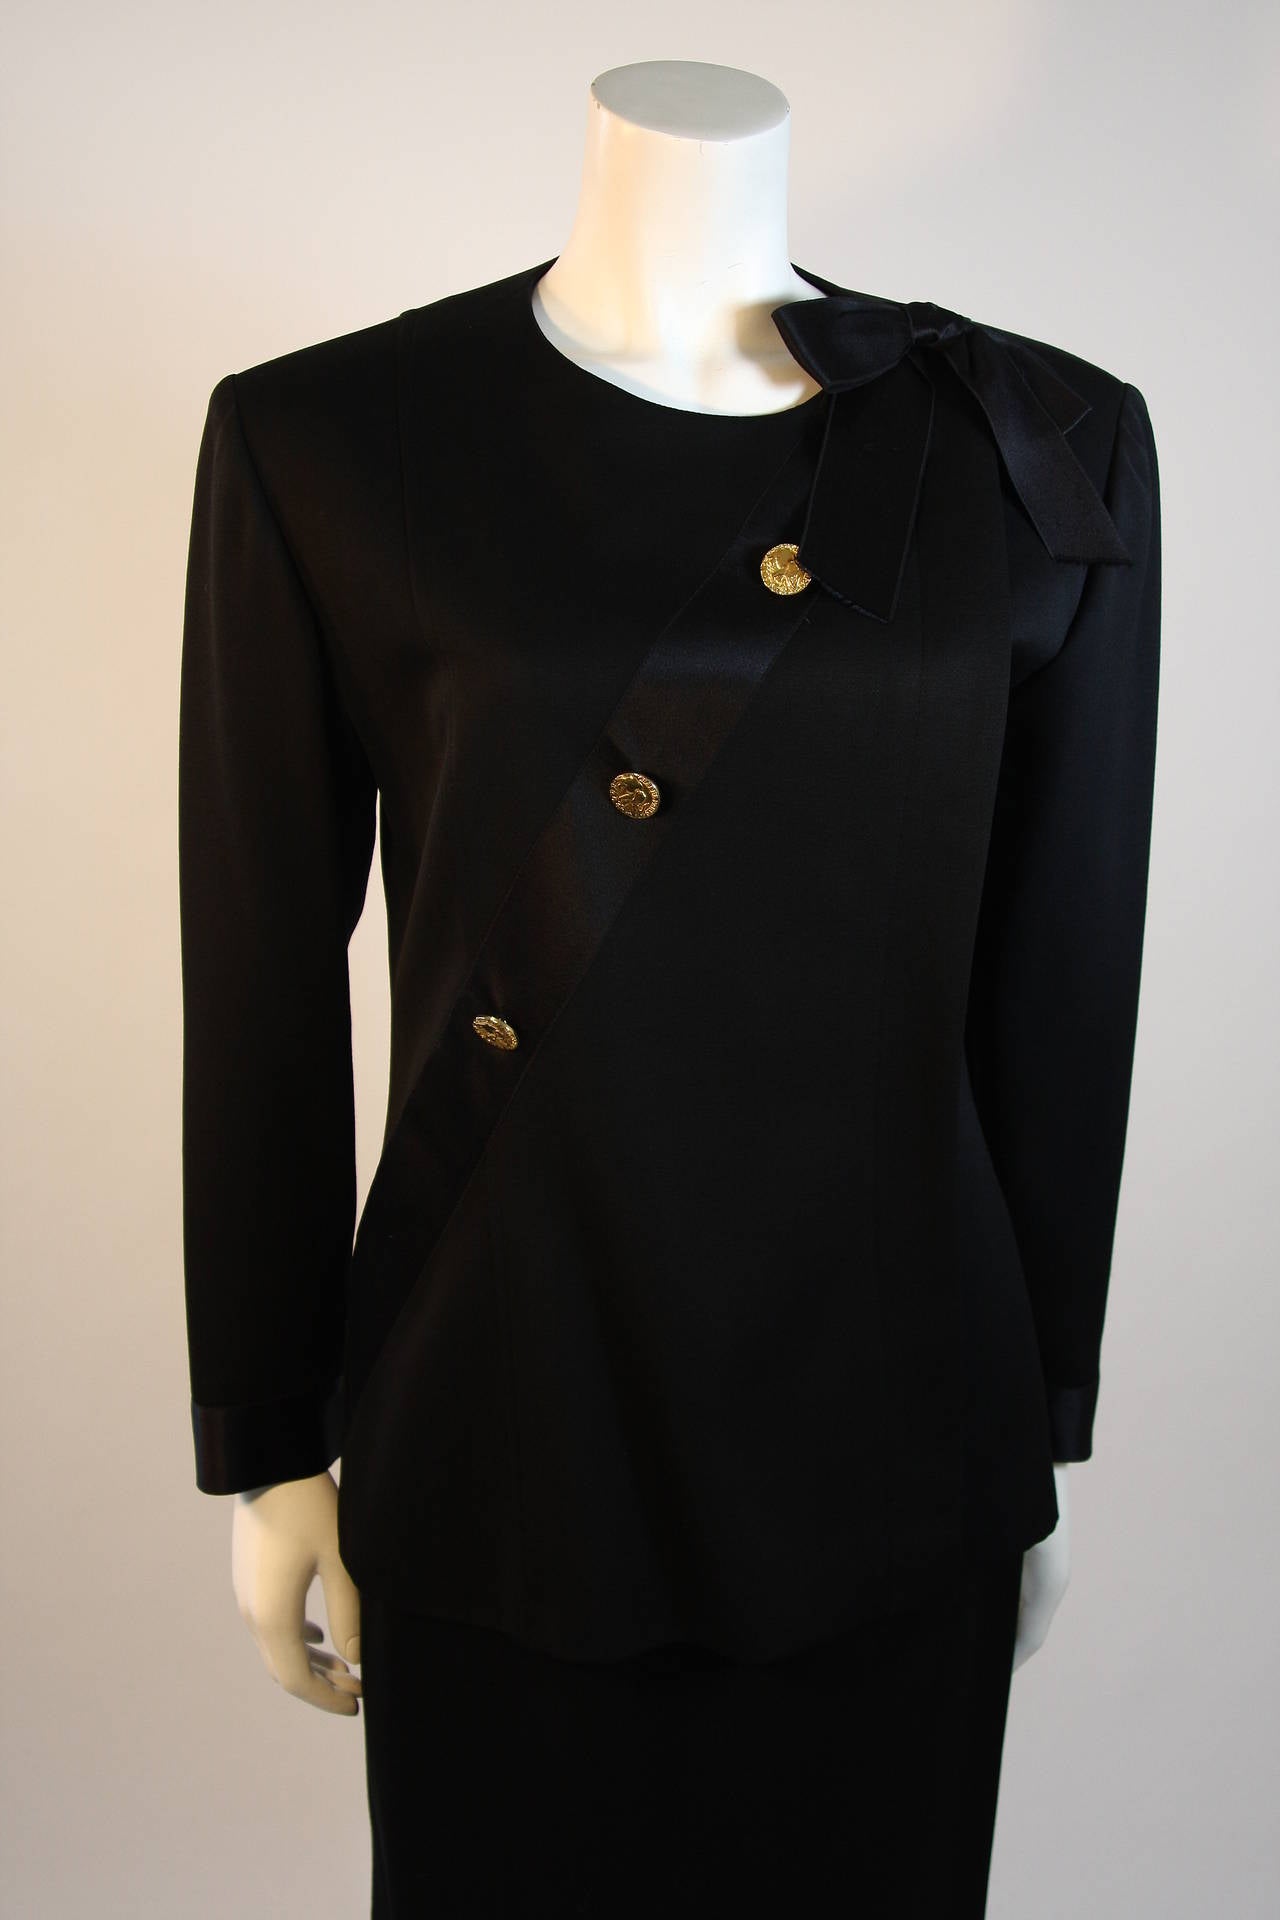 Black wool jacket with hidden button placket at left side, with cross body black silk satin ribbon adorned with gold elephant embossed Chanel Paris buttons, finished with a bow at the left shoulder. The cuffs of the jacket are trimmed in same 1.75